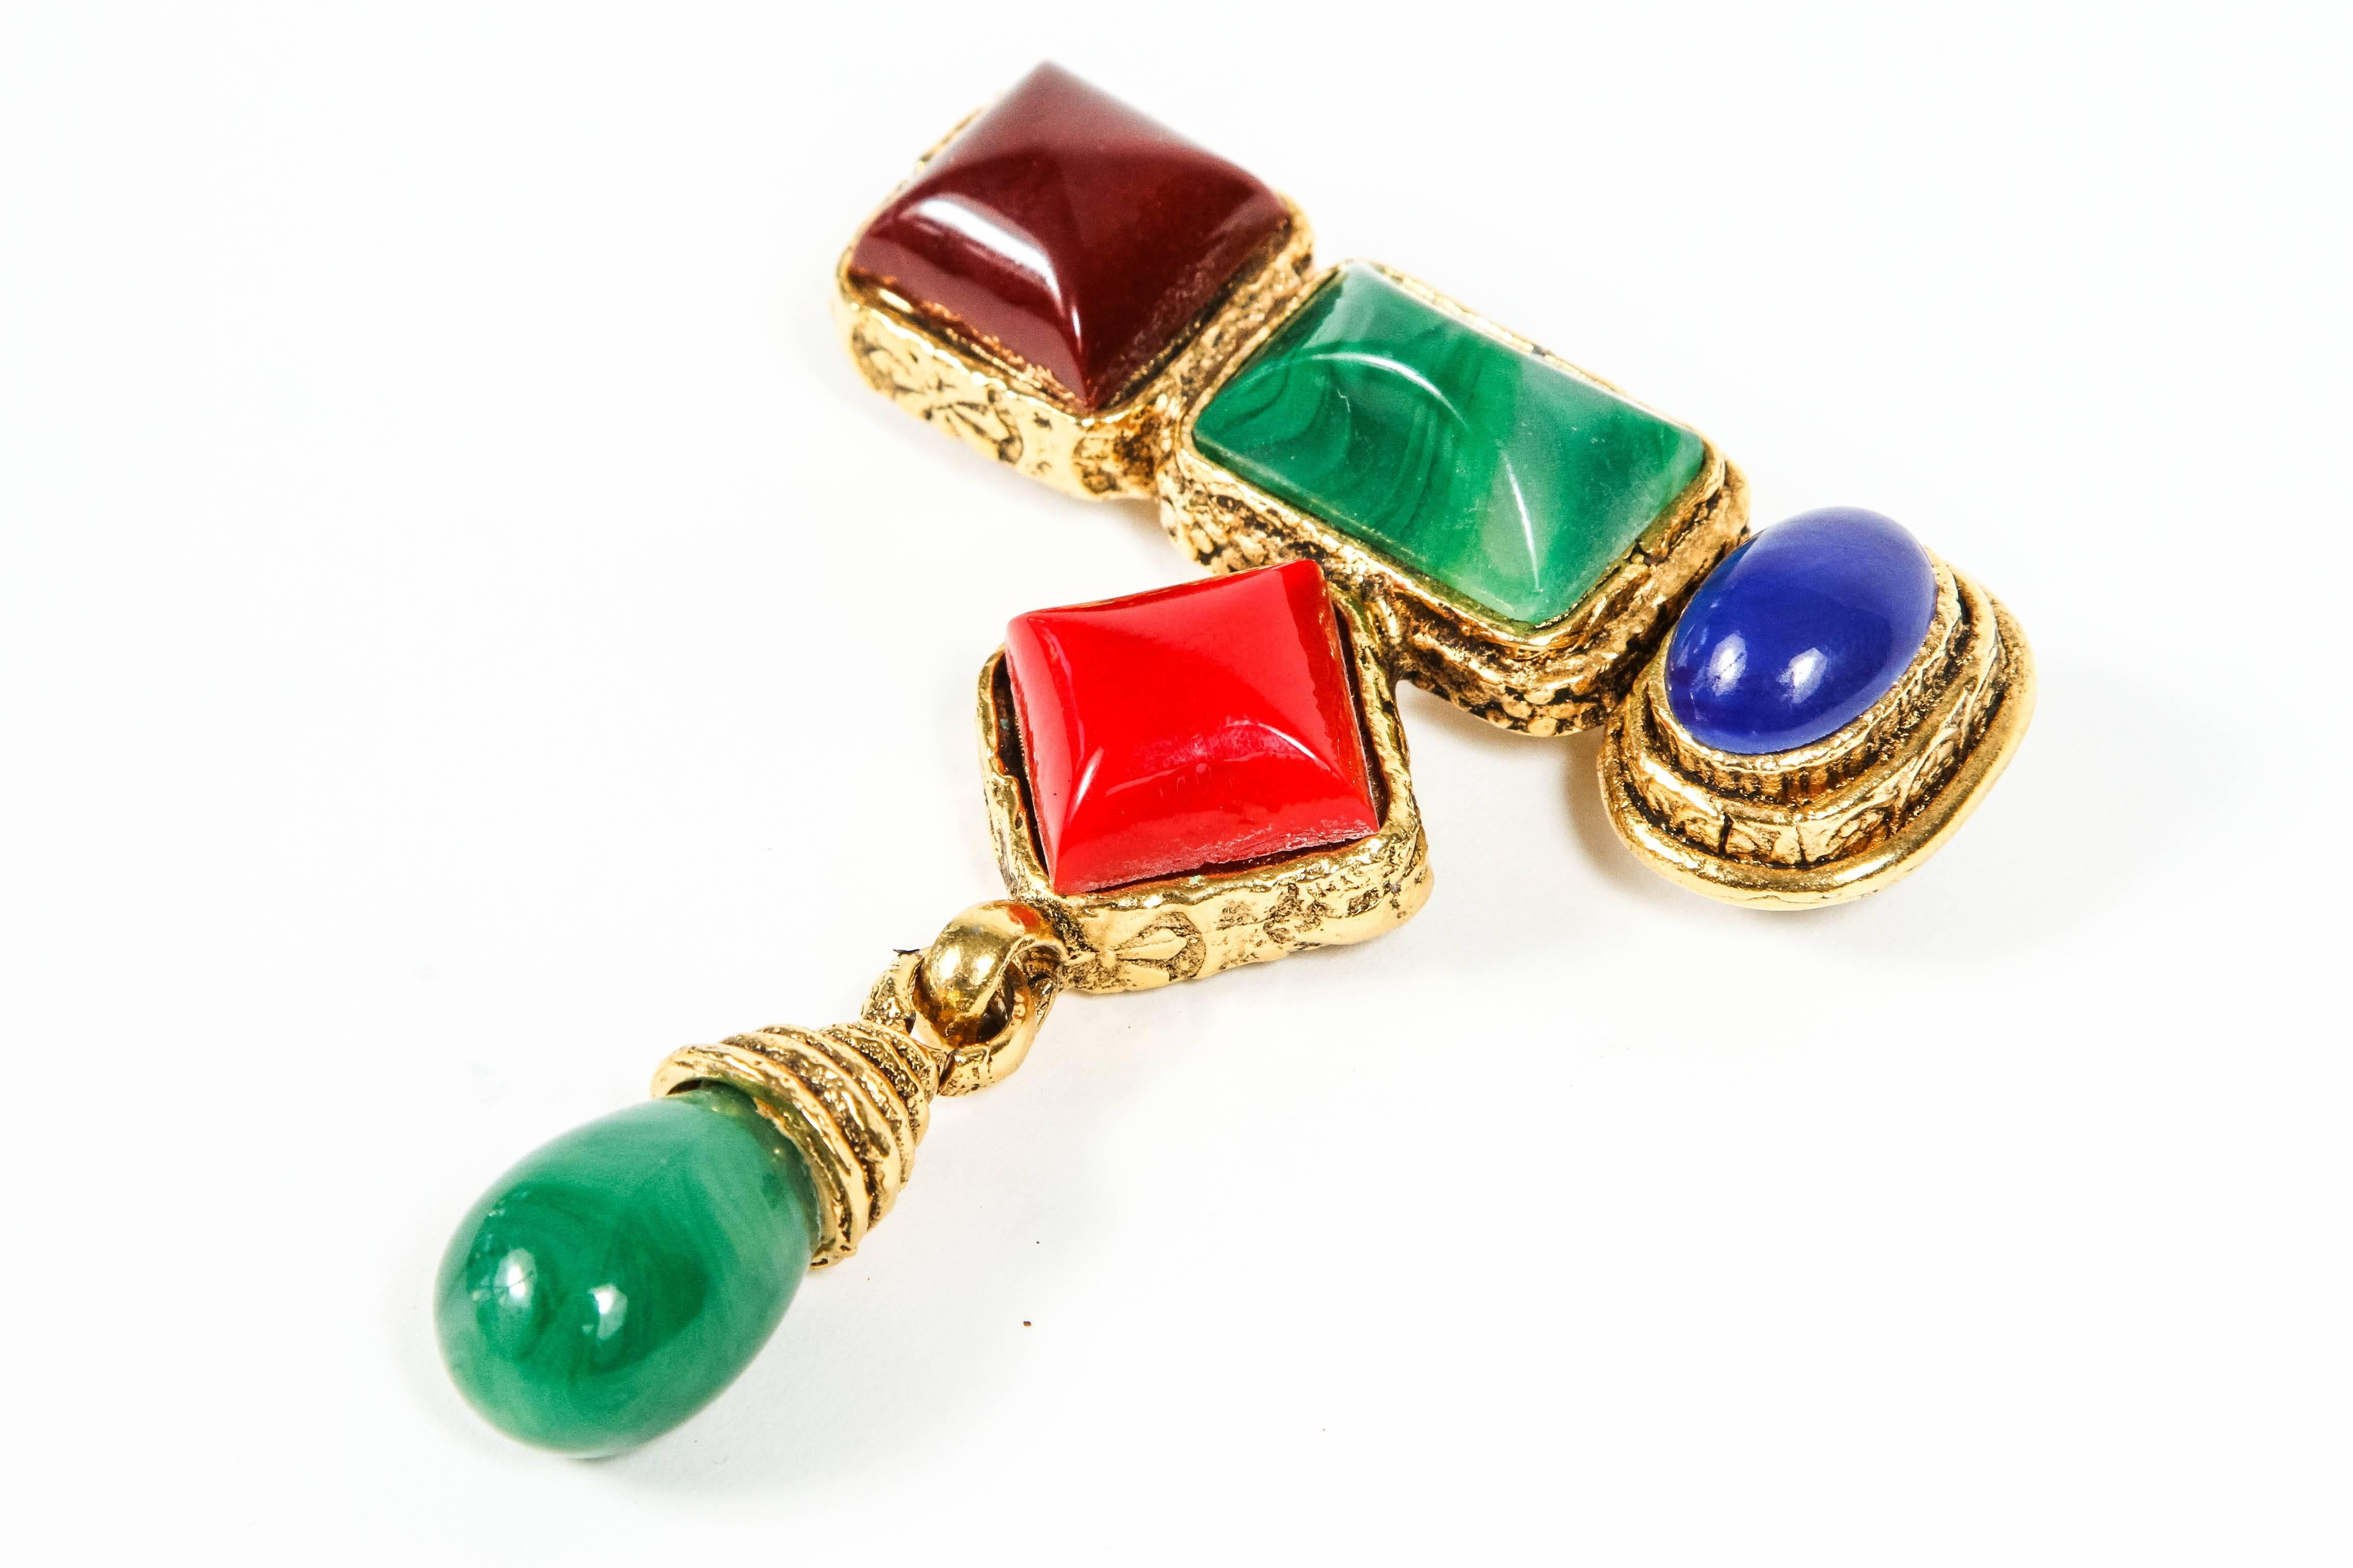 An unusual Brooch with an added pendent element fashioned in gilt metal with wonderful glass stones.  The asymmetrical design adds to the interest. 